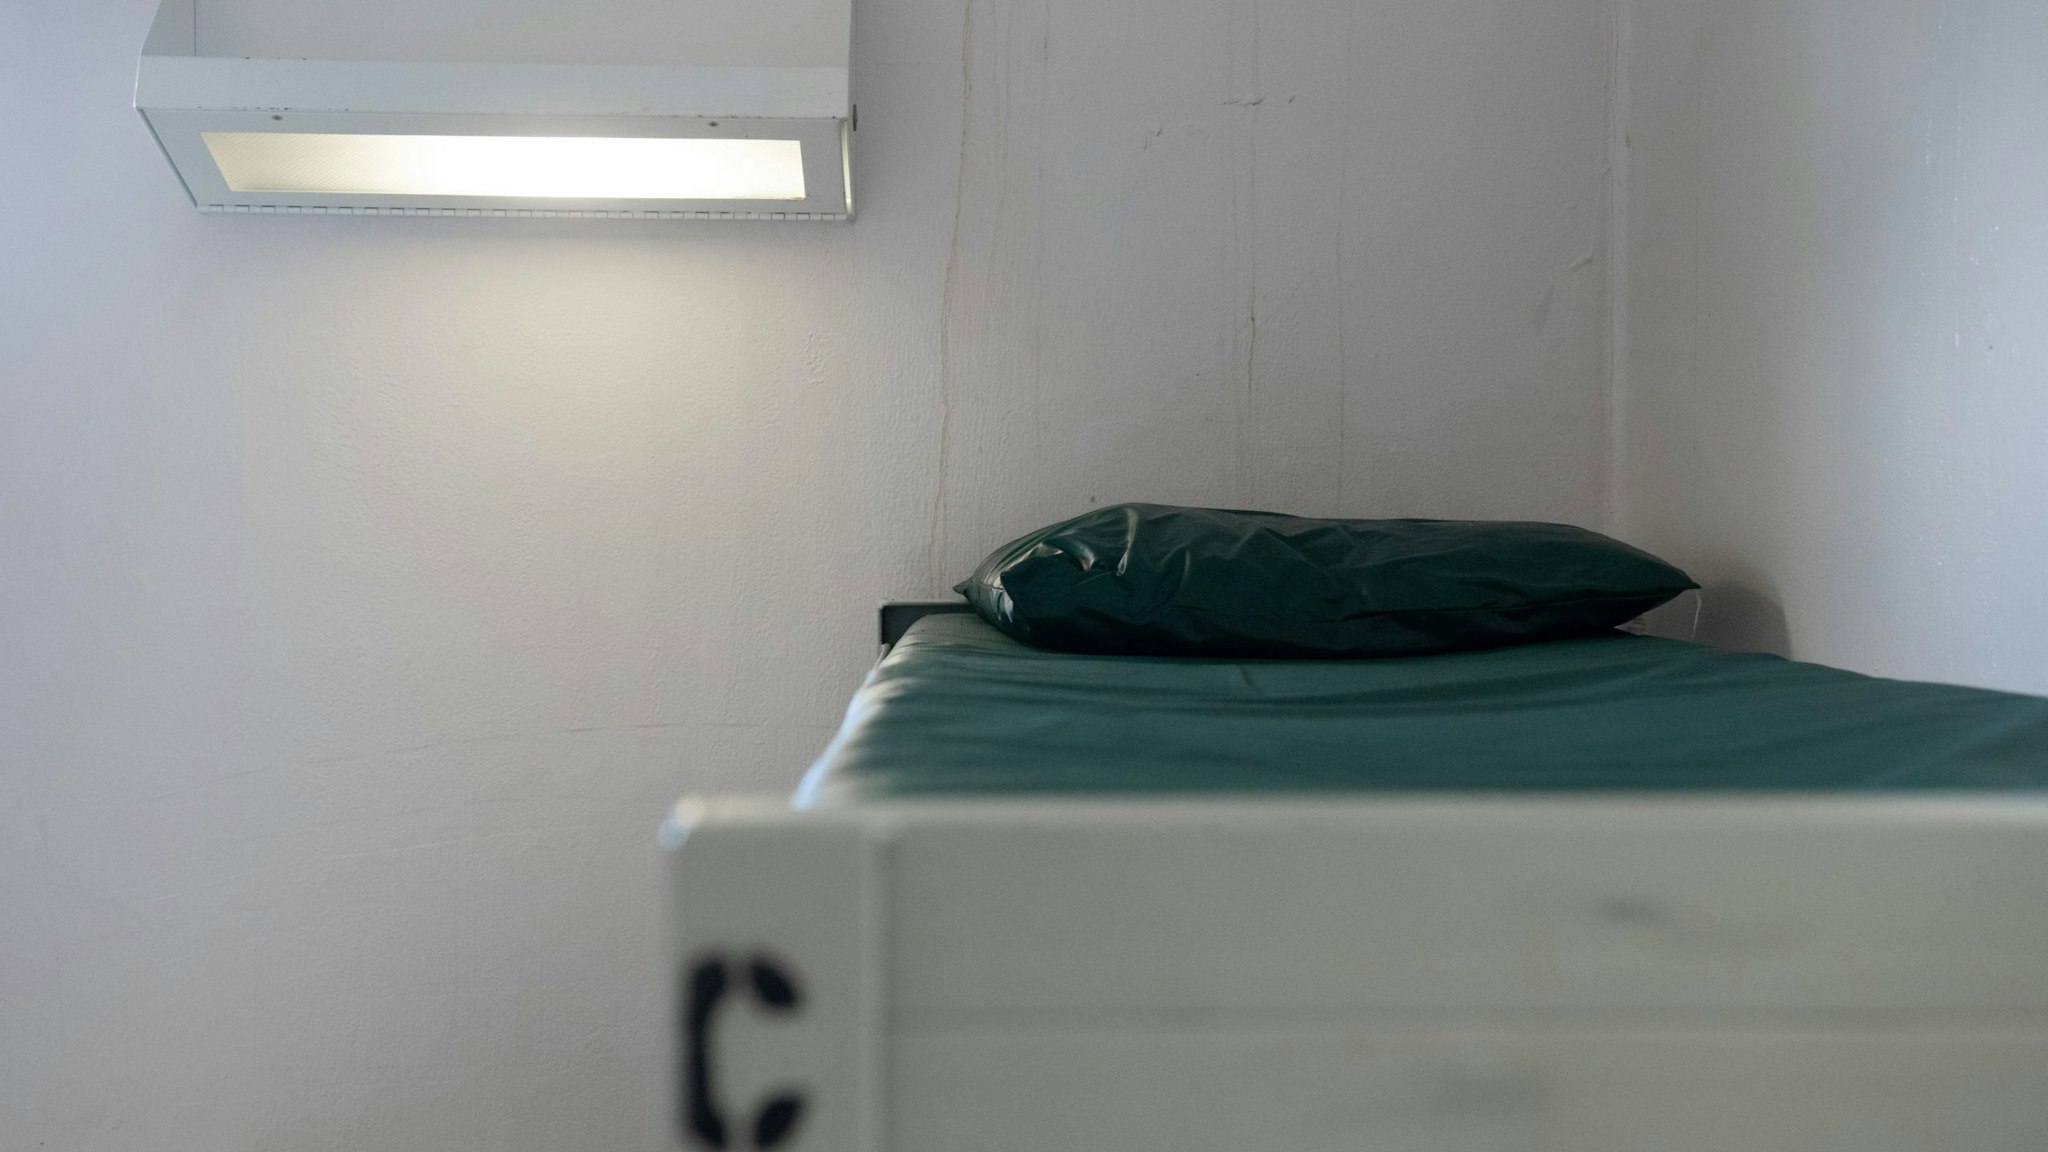 A bunk bed inside a cell is seen at the Caroline Detention Facility in Bowling Green, Virginia, on August 13, 2018. - A former regional jail, the facility has been contracted by the US Department of Homeland Security Immigration and Customs Enforcement (ICE) to house undocumented adult immigrant detainees for violations of immigration laws (Photo by SAUL LOEB / AFP) (Photo credit should read SAUL LOEB/AFP via Getty Images)